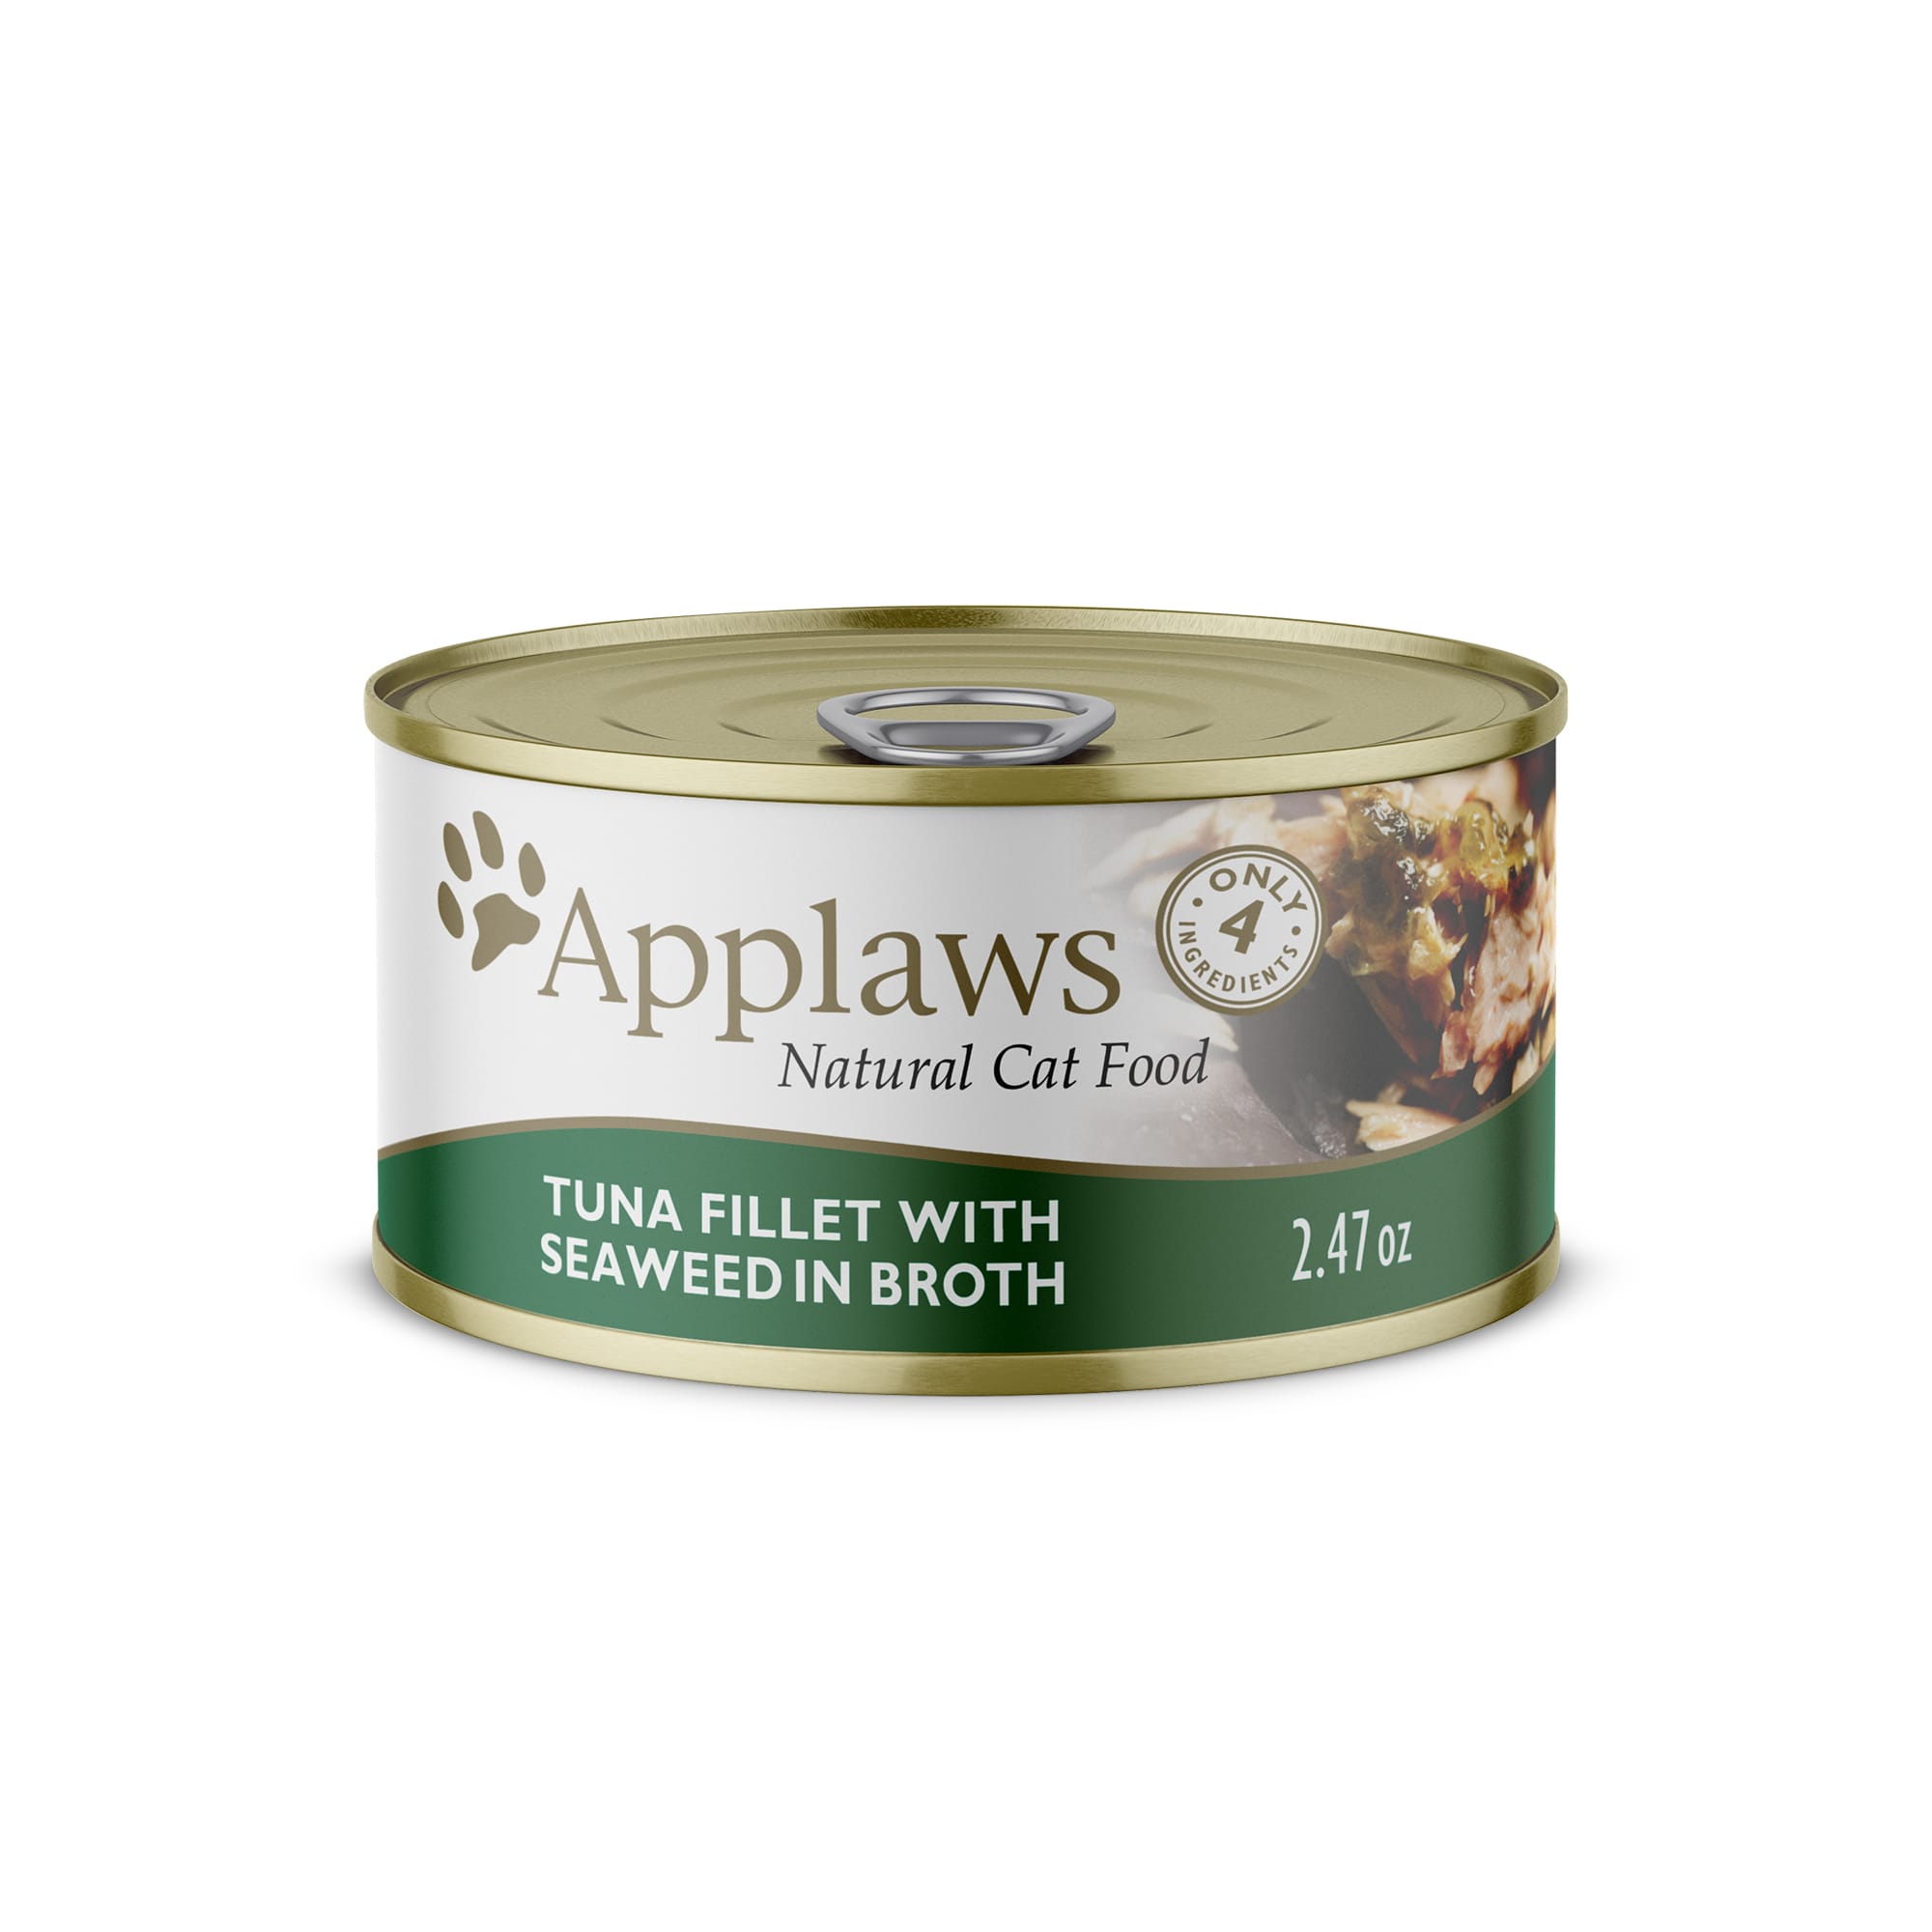 Applaws Grain Free Chicken Dry Cat Food 5 5lb Check This Awesome Image Cat Food Natural Cat Food